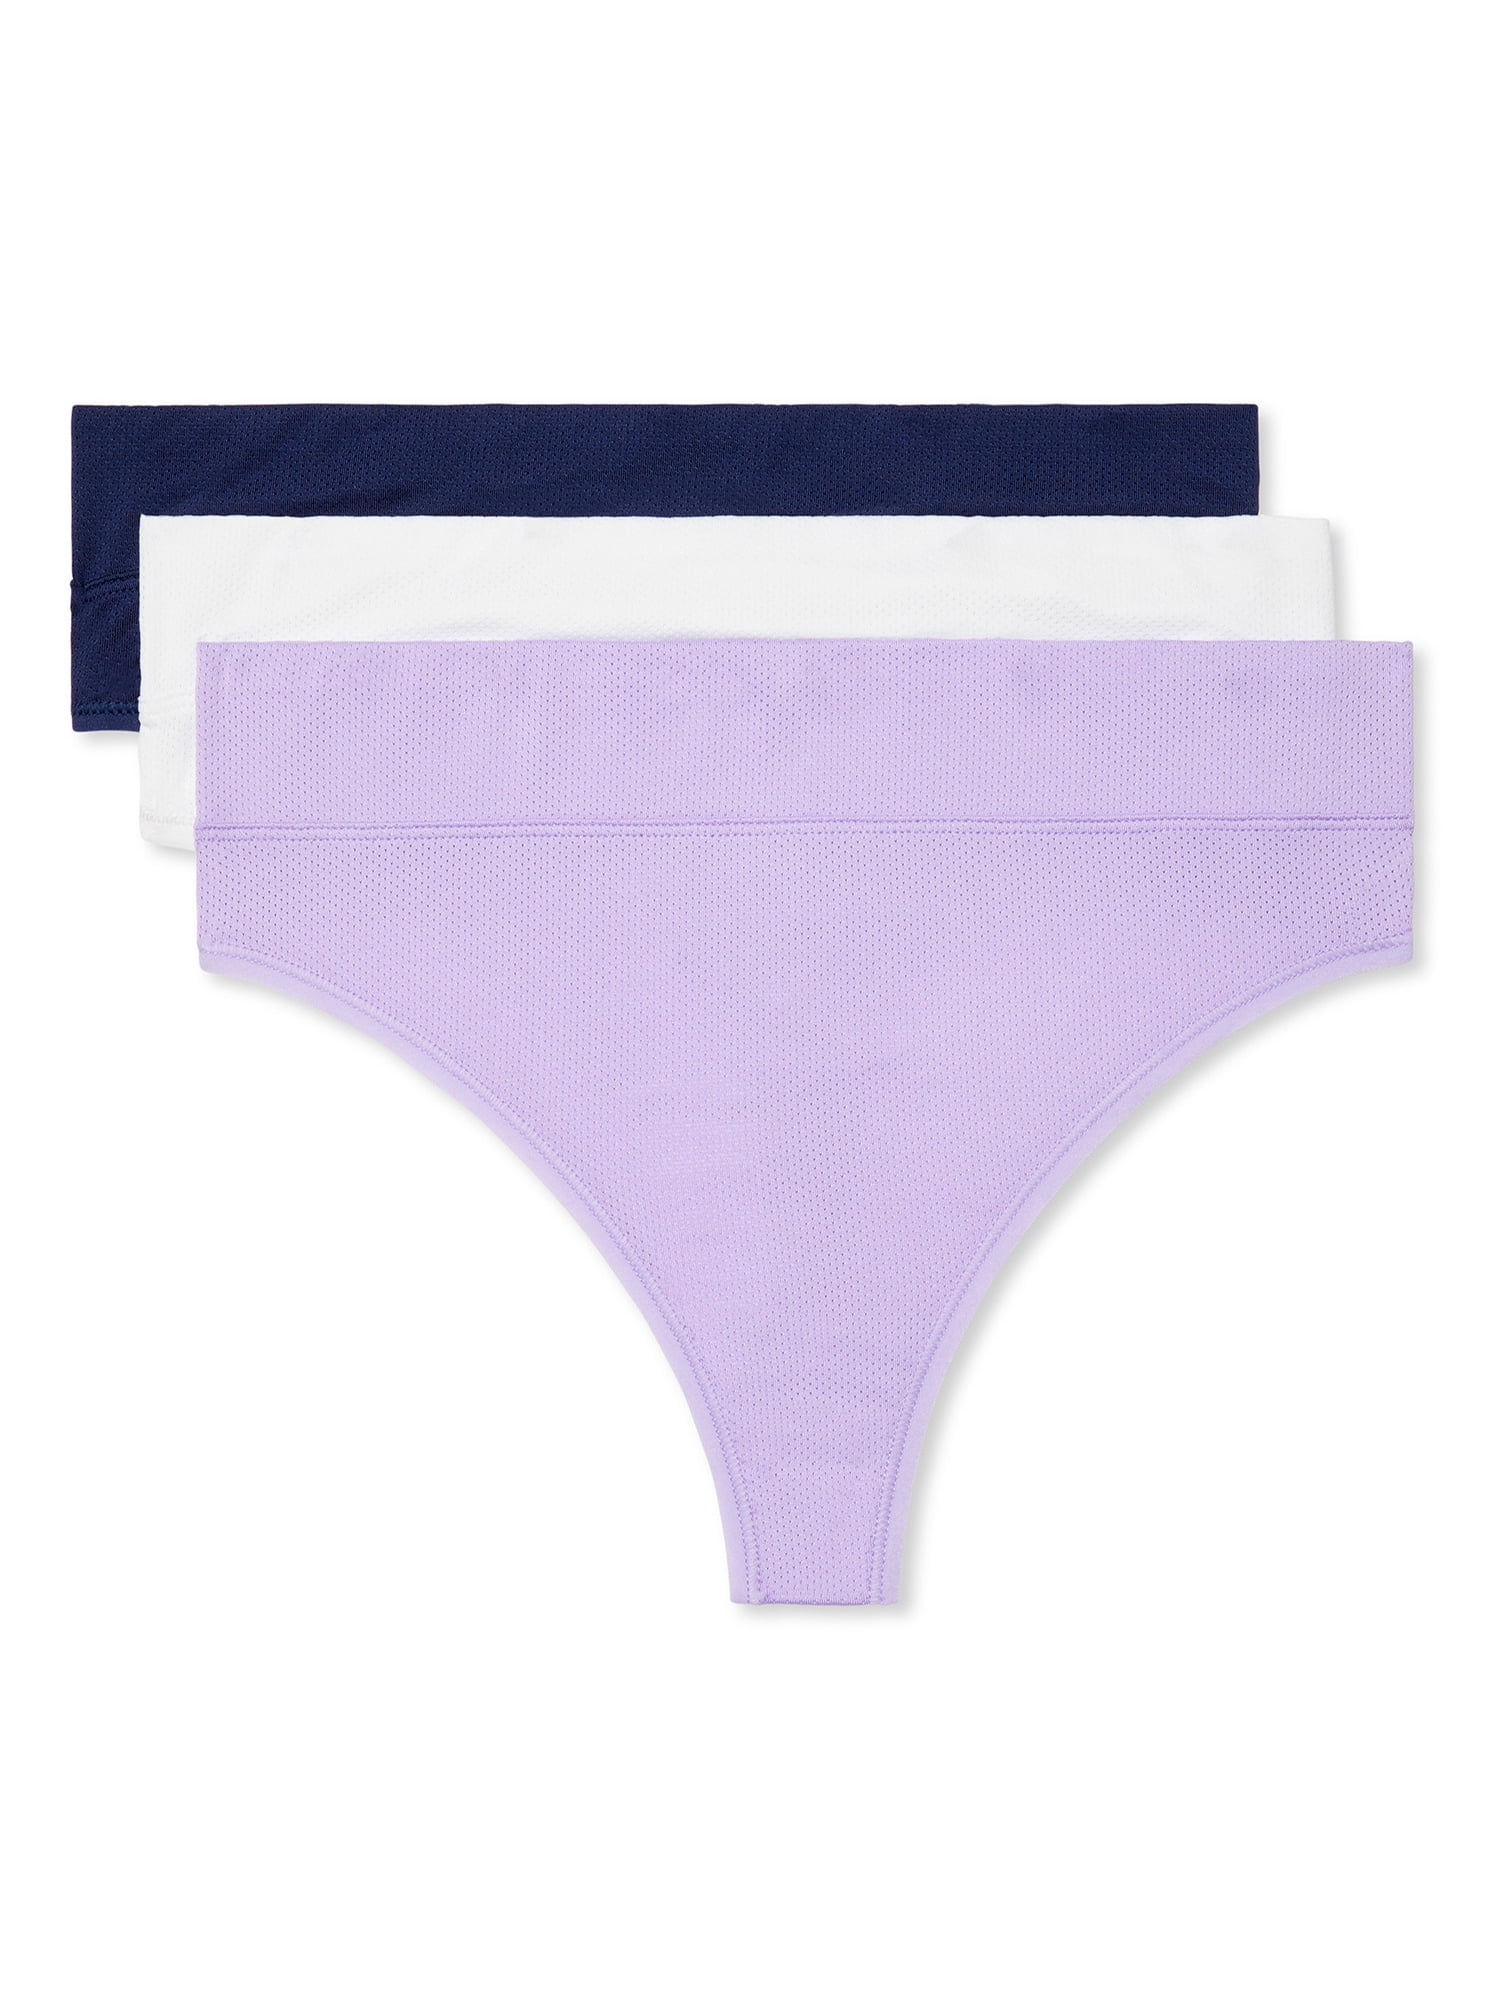 Warners® Blissful Benefits Moisture-Wicking Thong 3-Pack RX4963W